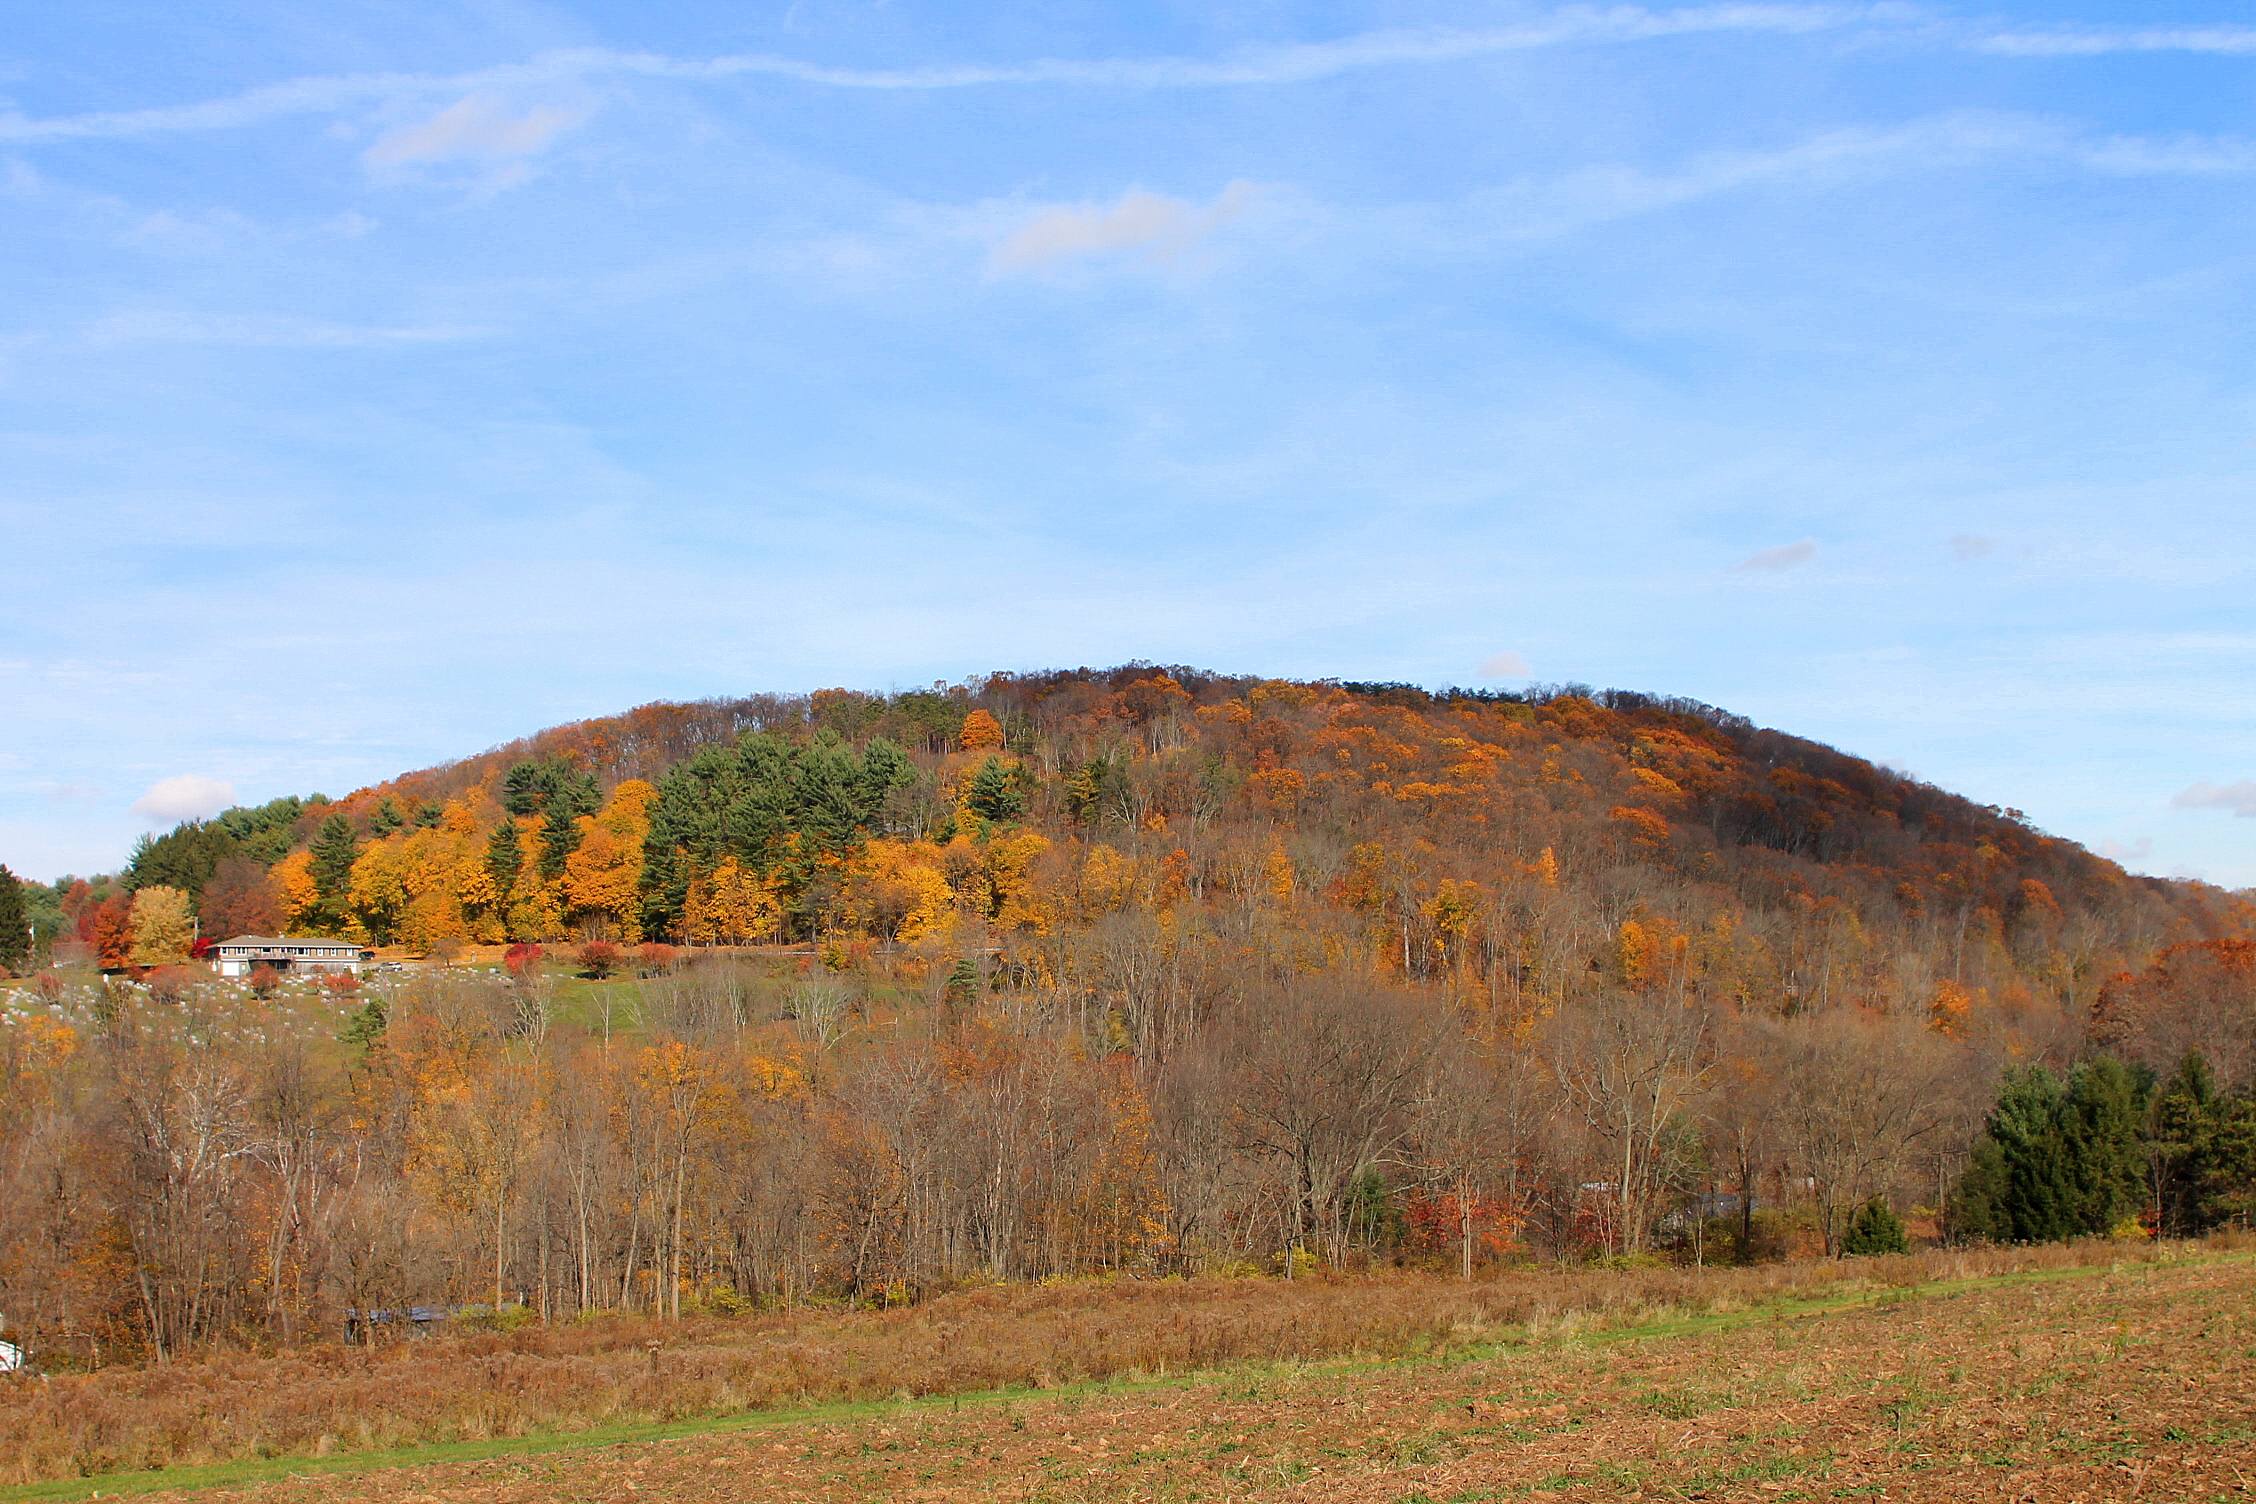 Hill in Catawissa Township